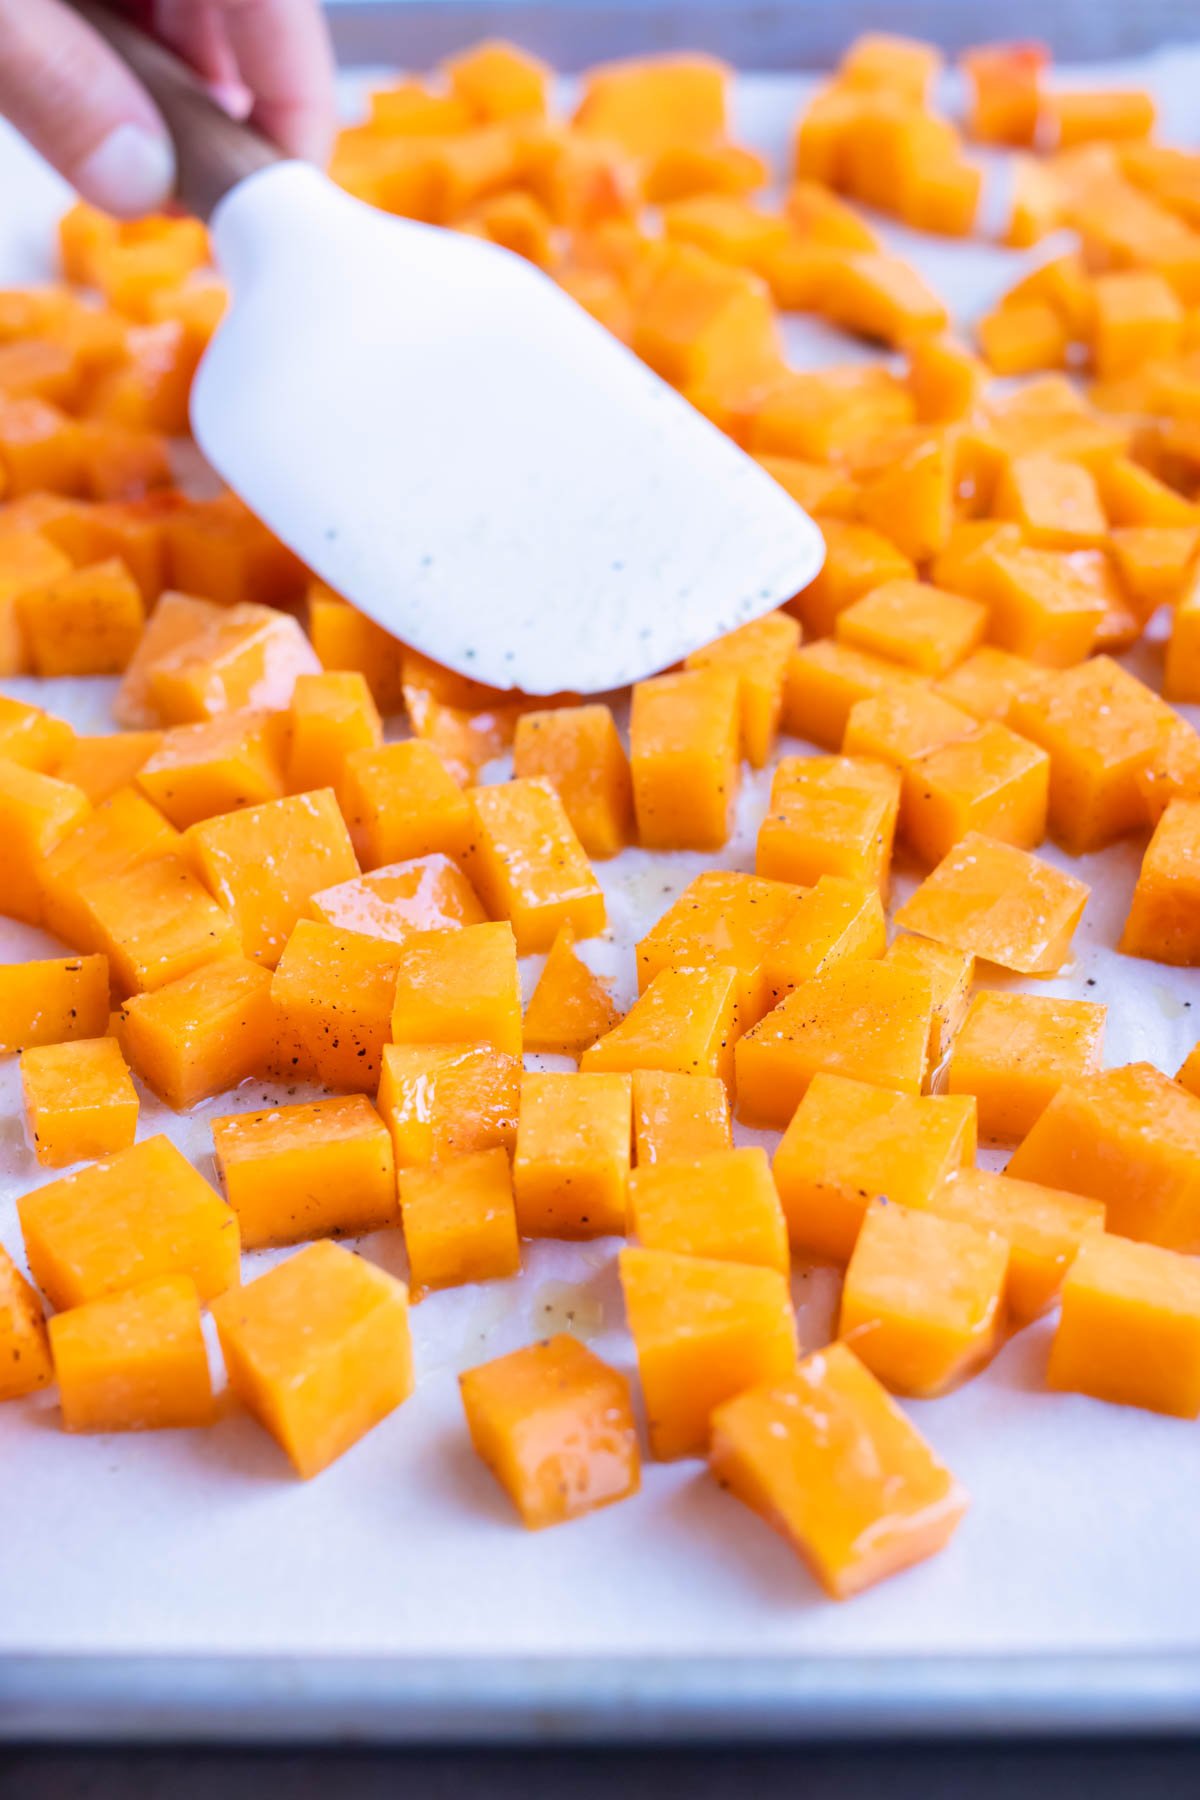 Butternut squash is roasted in the oven on a baking sheet.